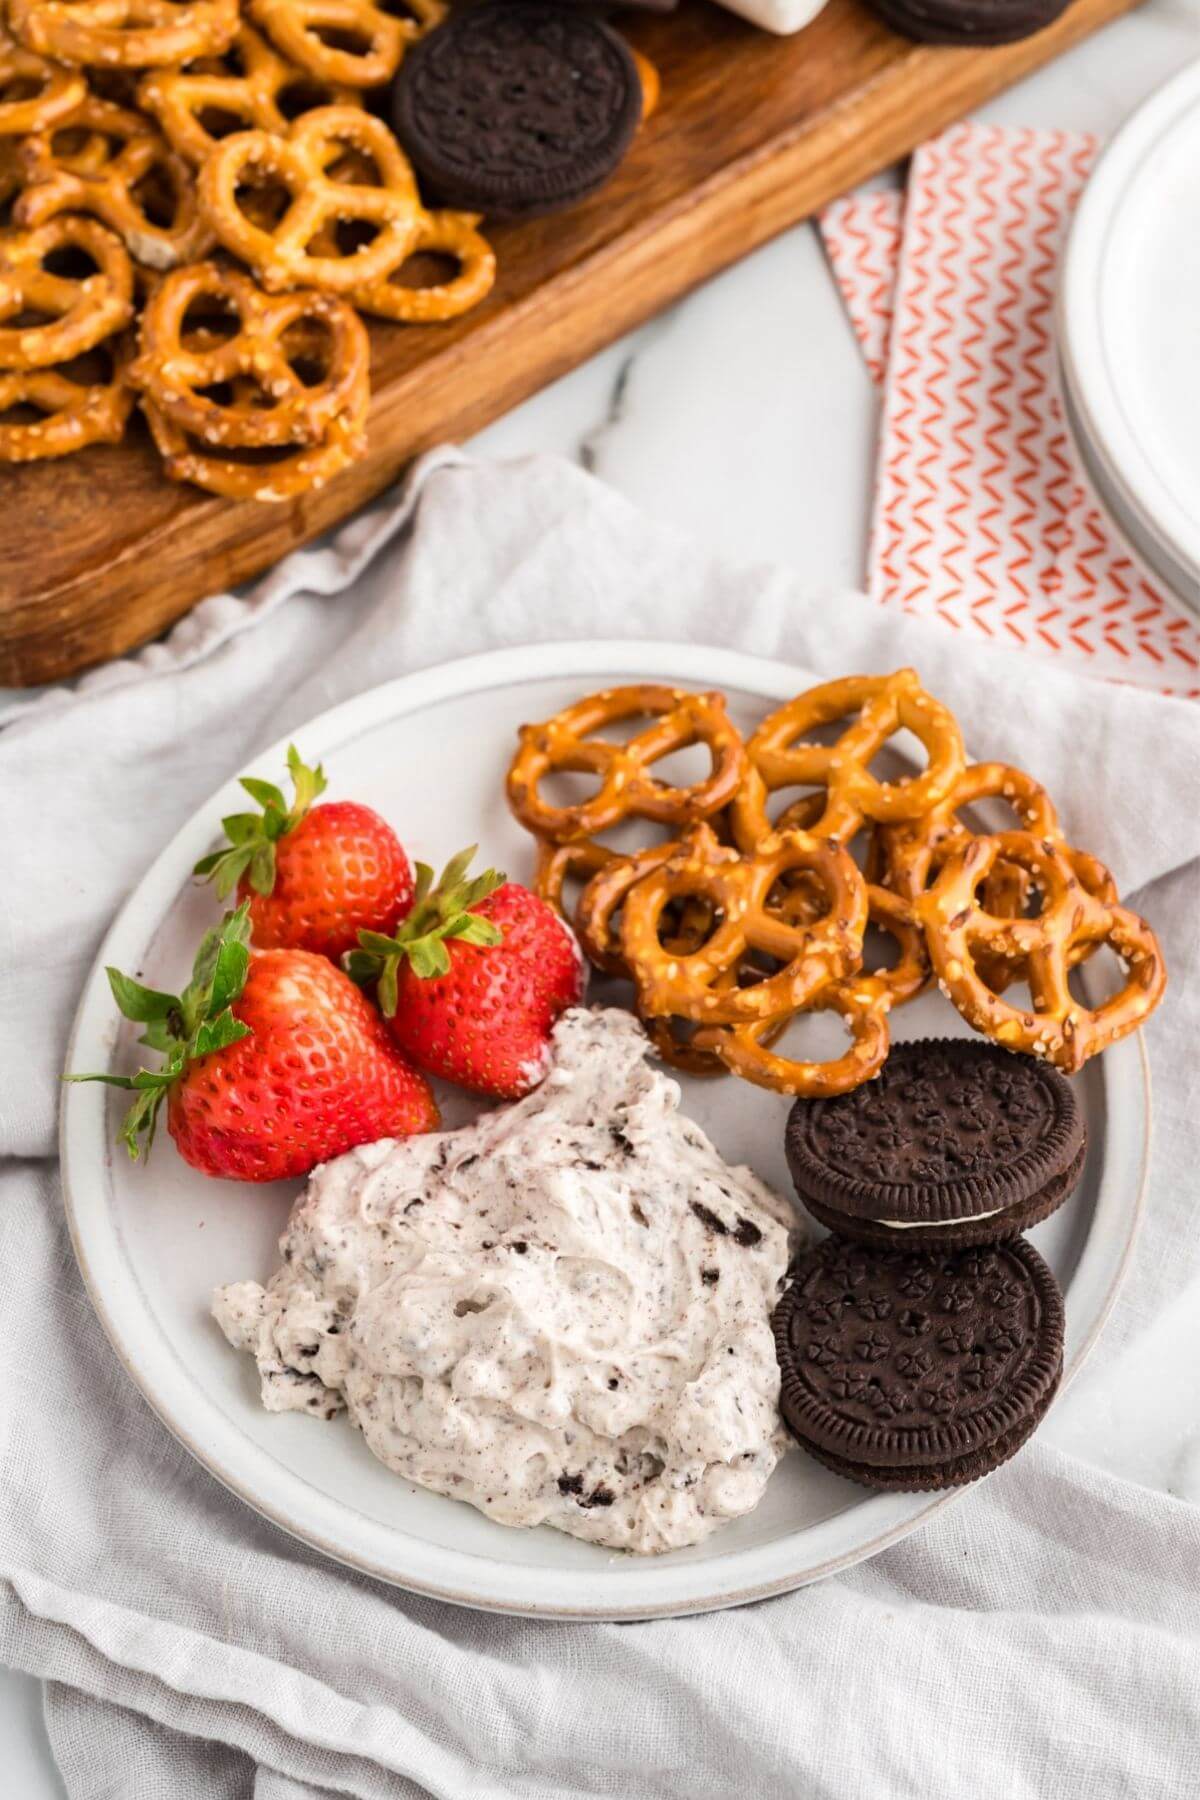 Serving of Oreo cookie dip with strawberries, extra Oreos and pretzels.